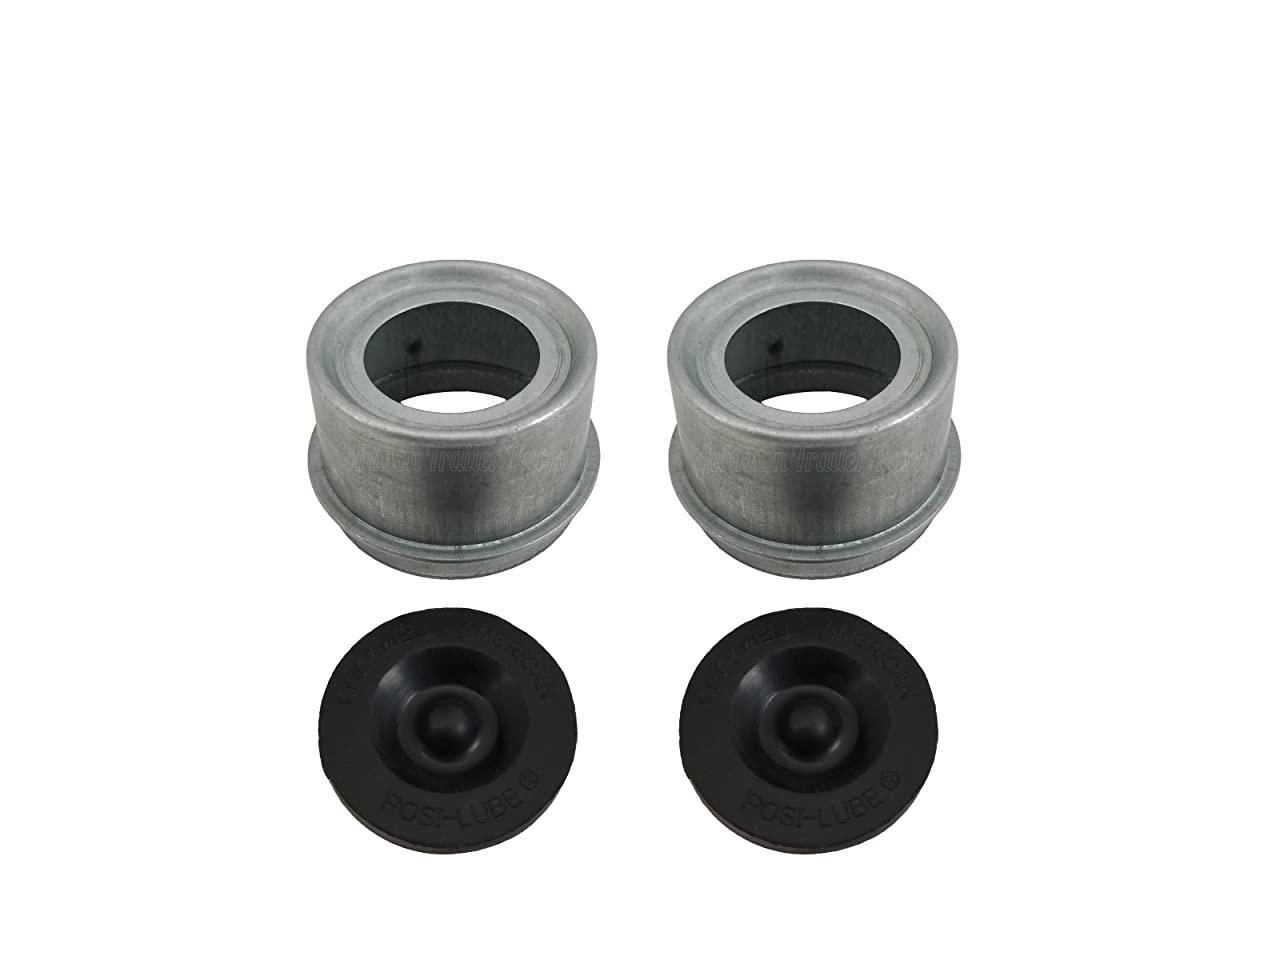 Fits Most 2,000 to 3,500 lb Axles 1.98 OD Posi-Lube Grease Cap Set 